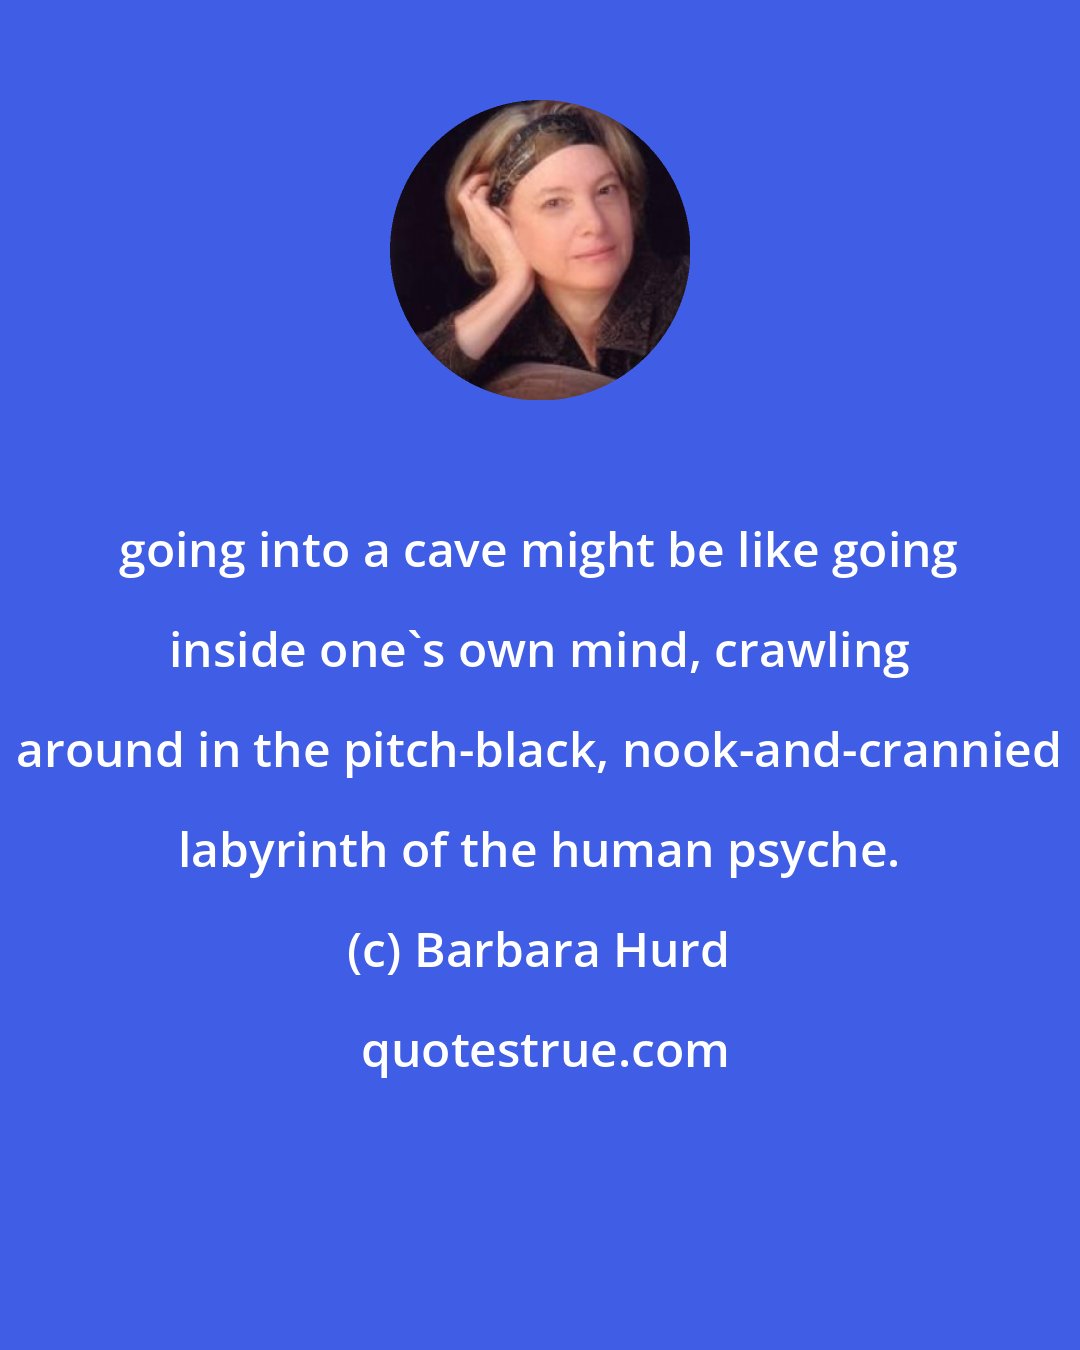 Barbara Hurd: going into a cave might be like going inside one's own mind, crawling around in the pitch-black, nook-and-crannied labyrinth of the human psyche.